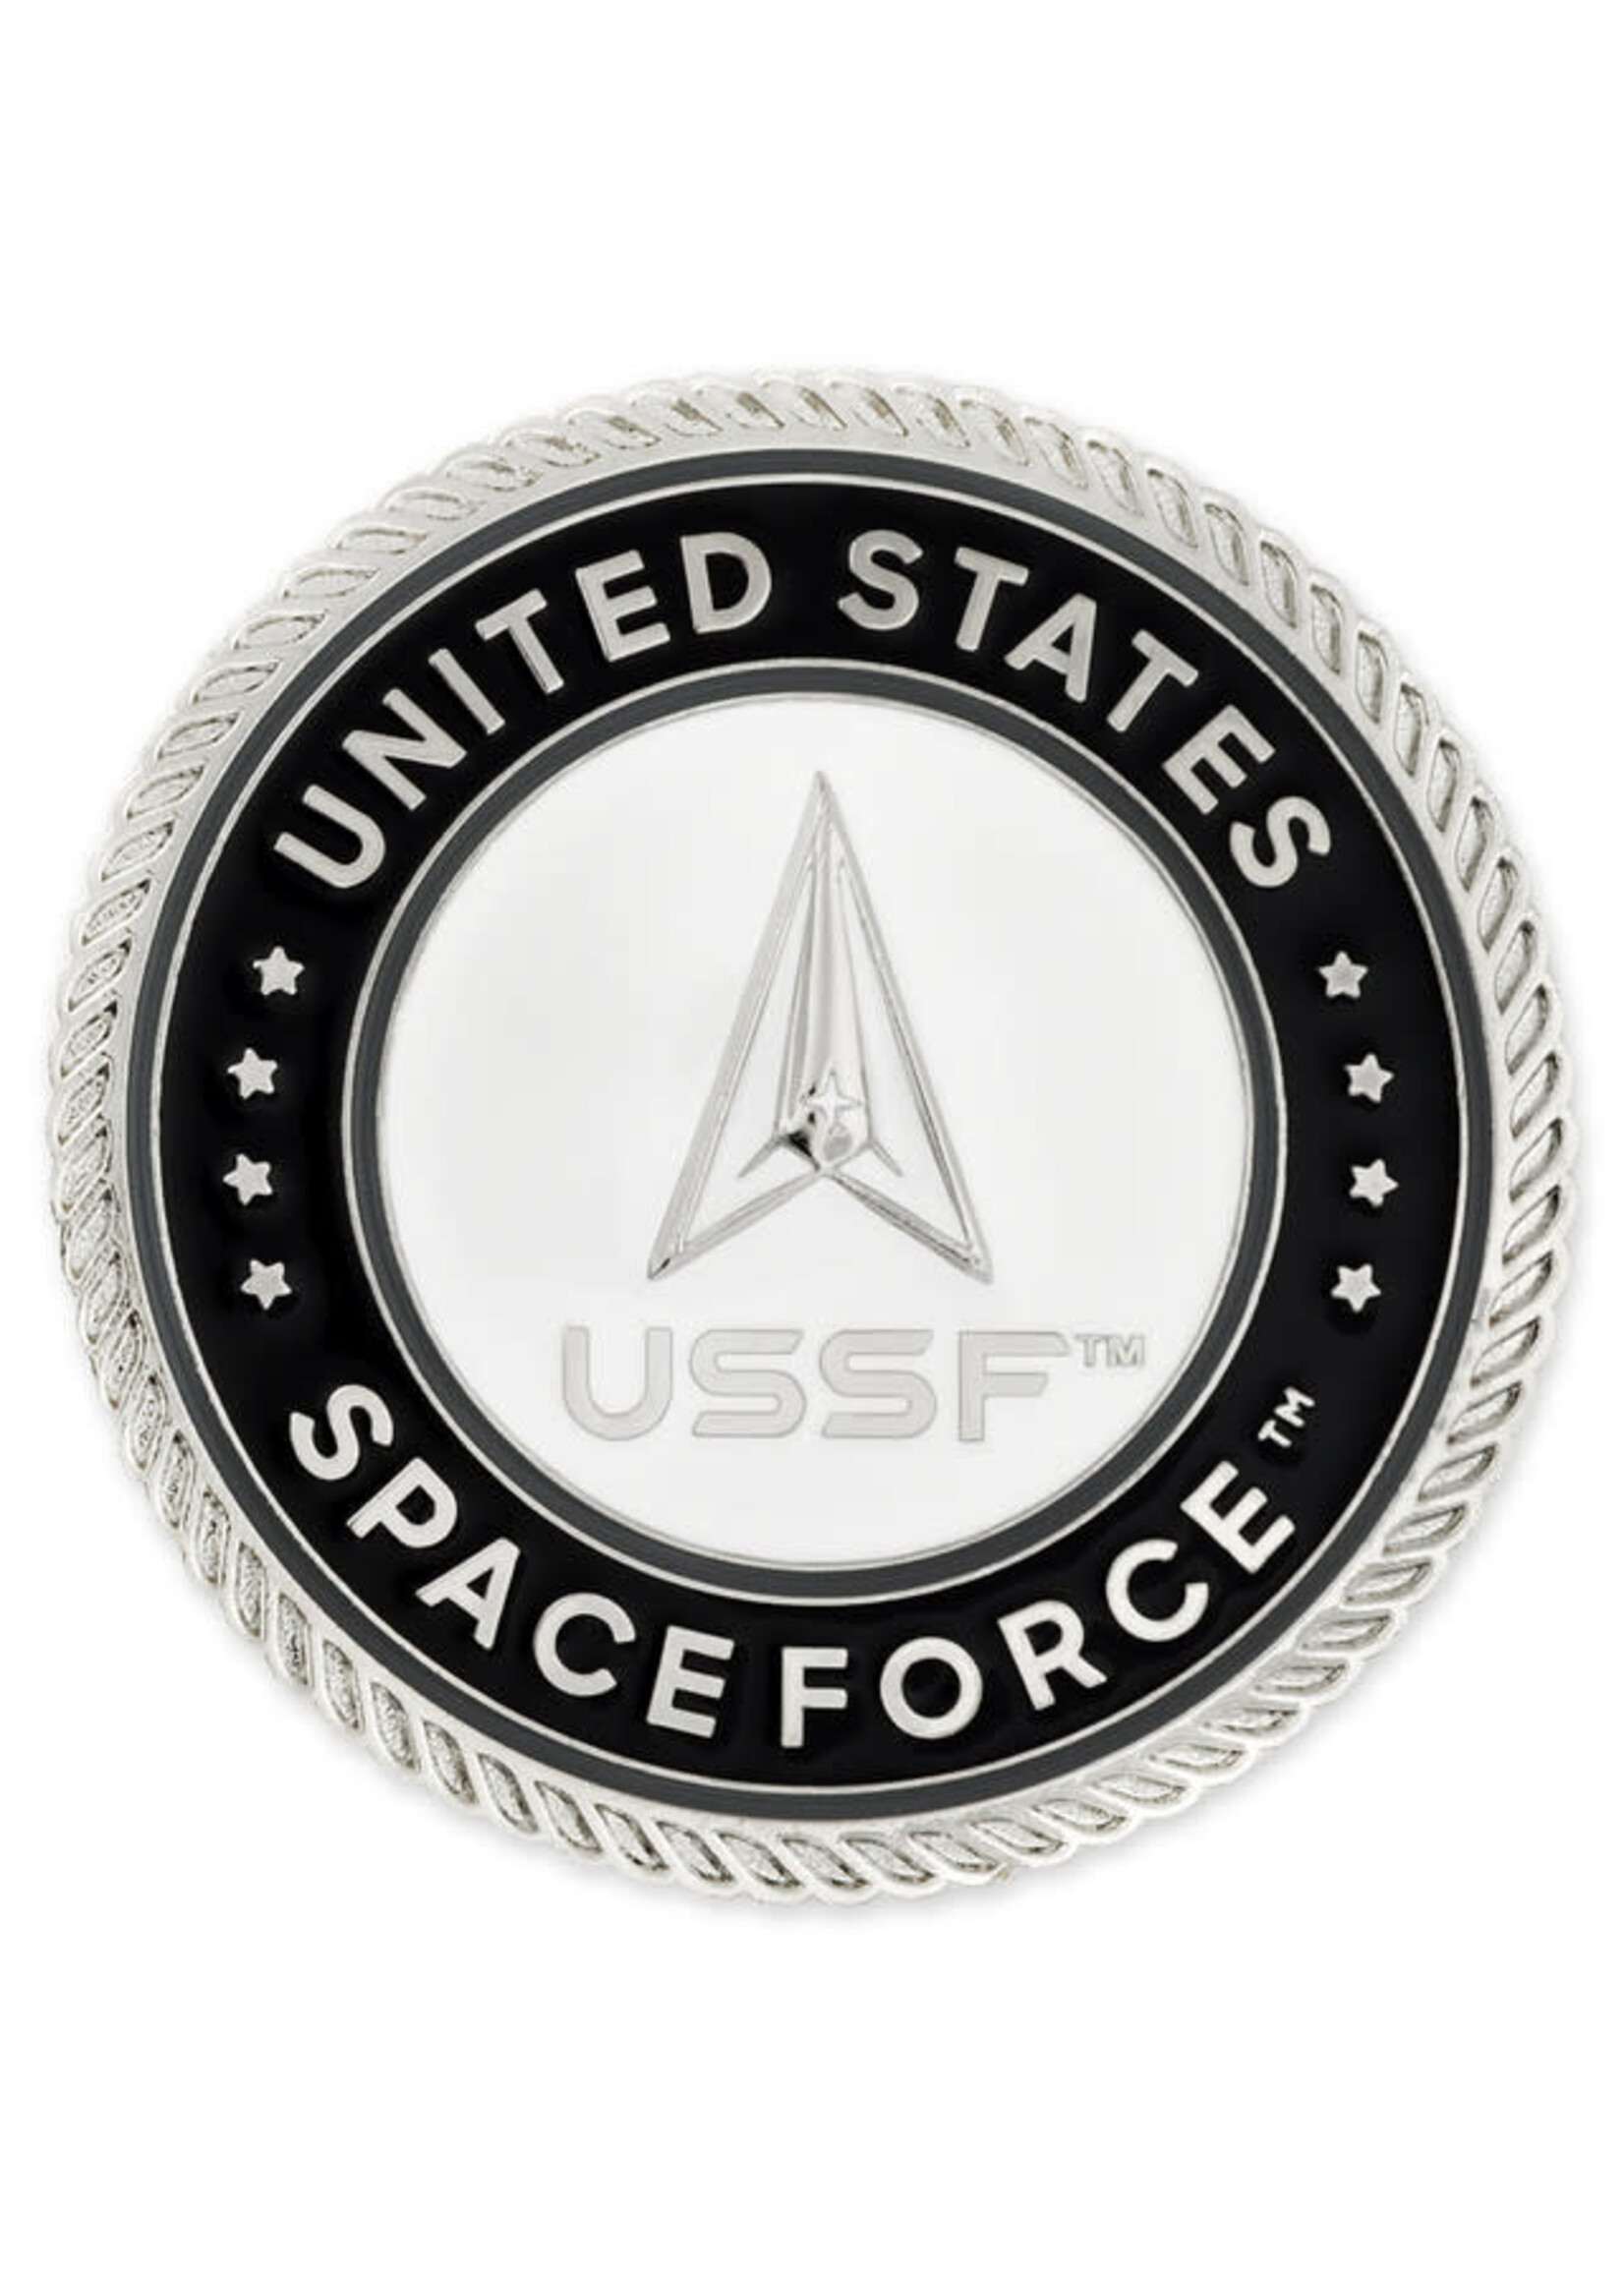 U.S. Space Fore 3D Challenge Coin